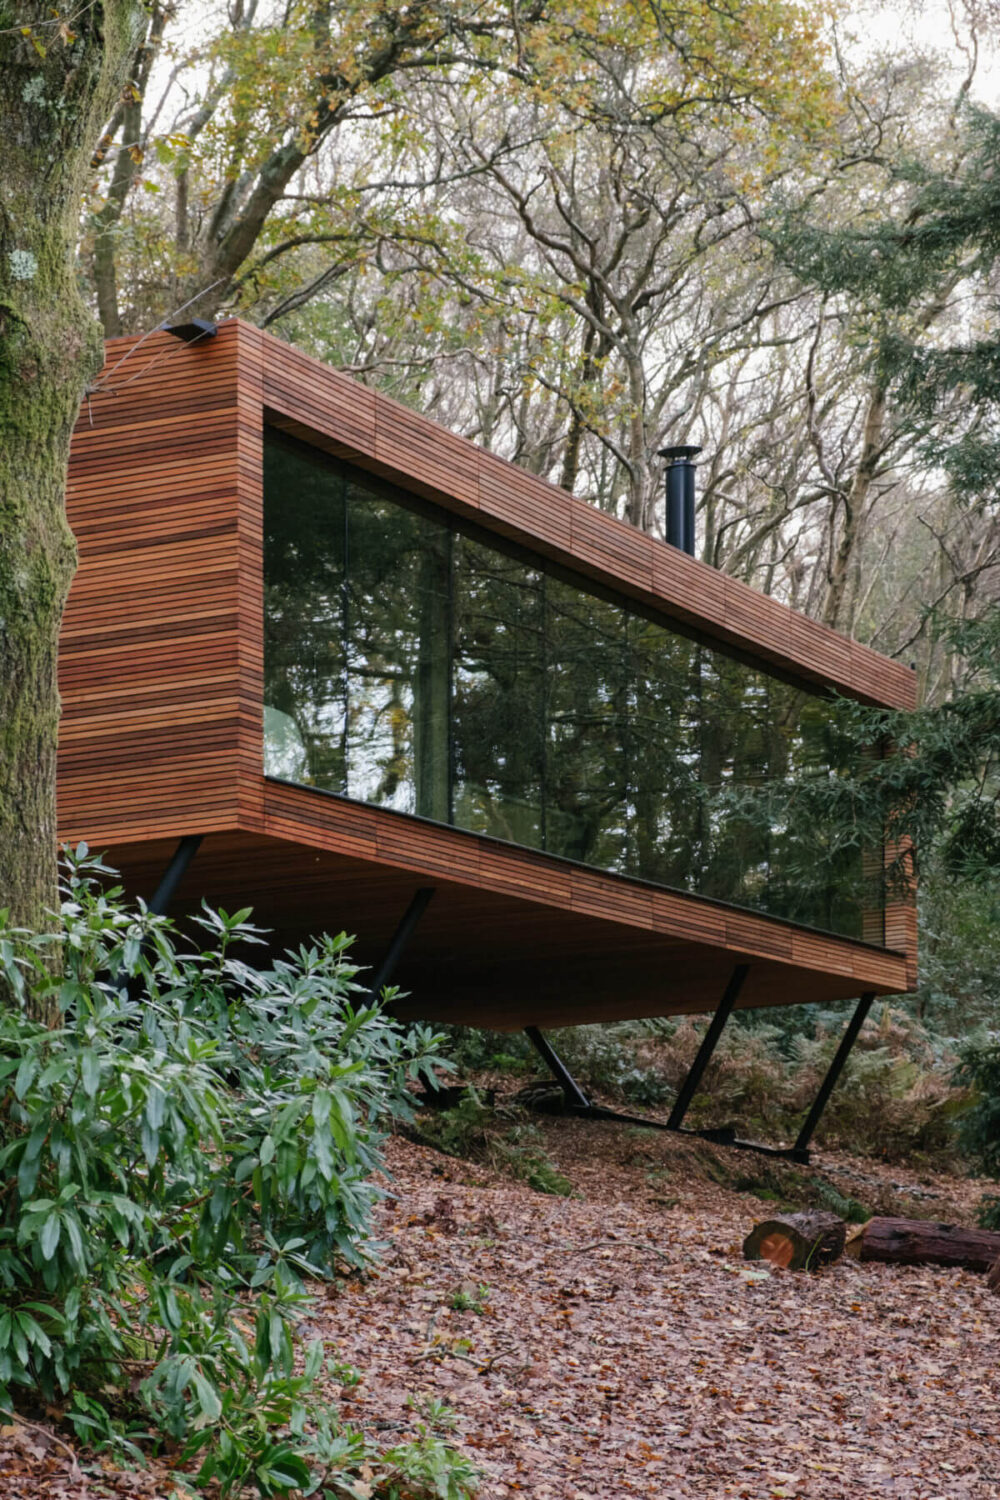 wood-glass-lodge-forest-england-nordroom